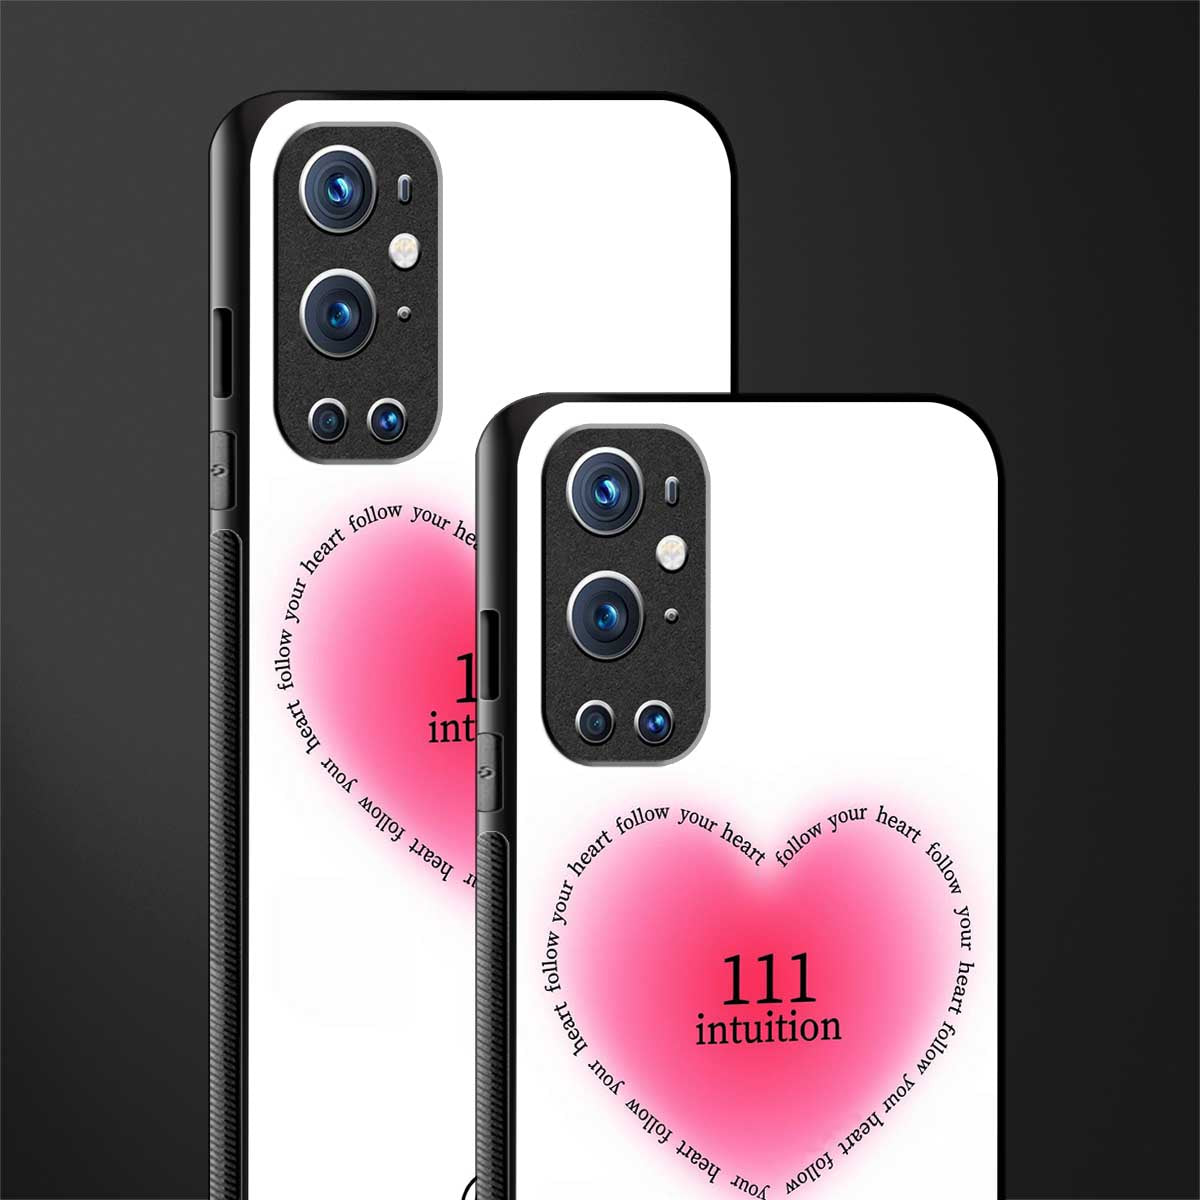 111 intuition glass case for oneplus 9 pro image-2